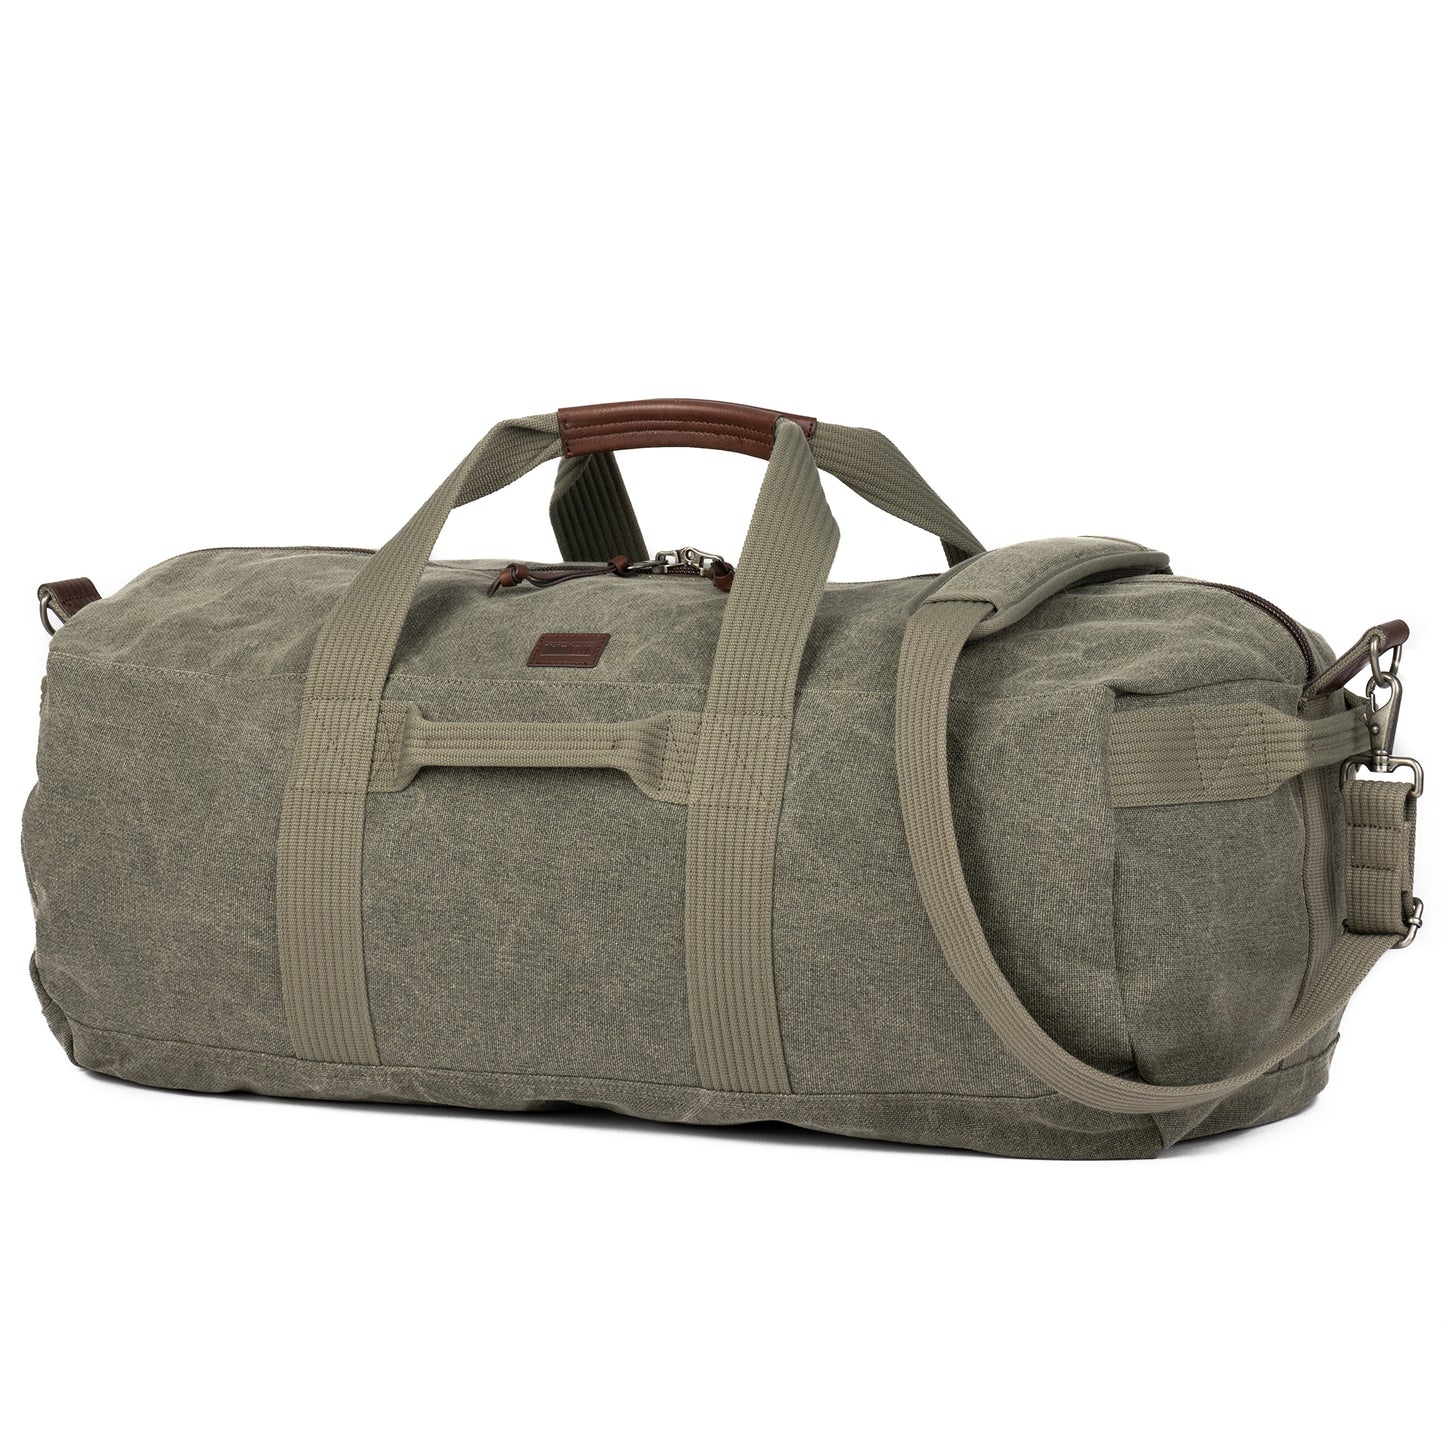 Retrospective Duffel Bag stone-washed cotton canvas with leather trim ...